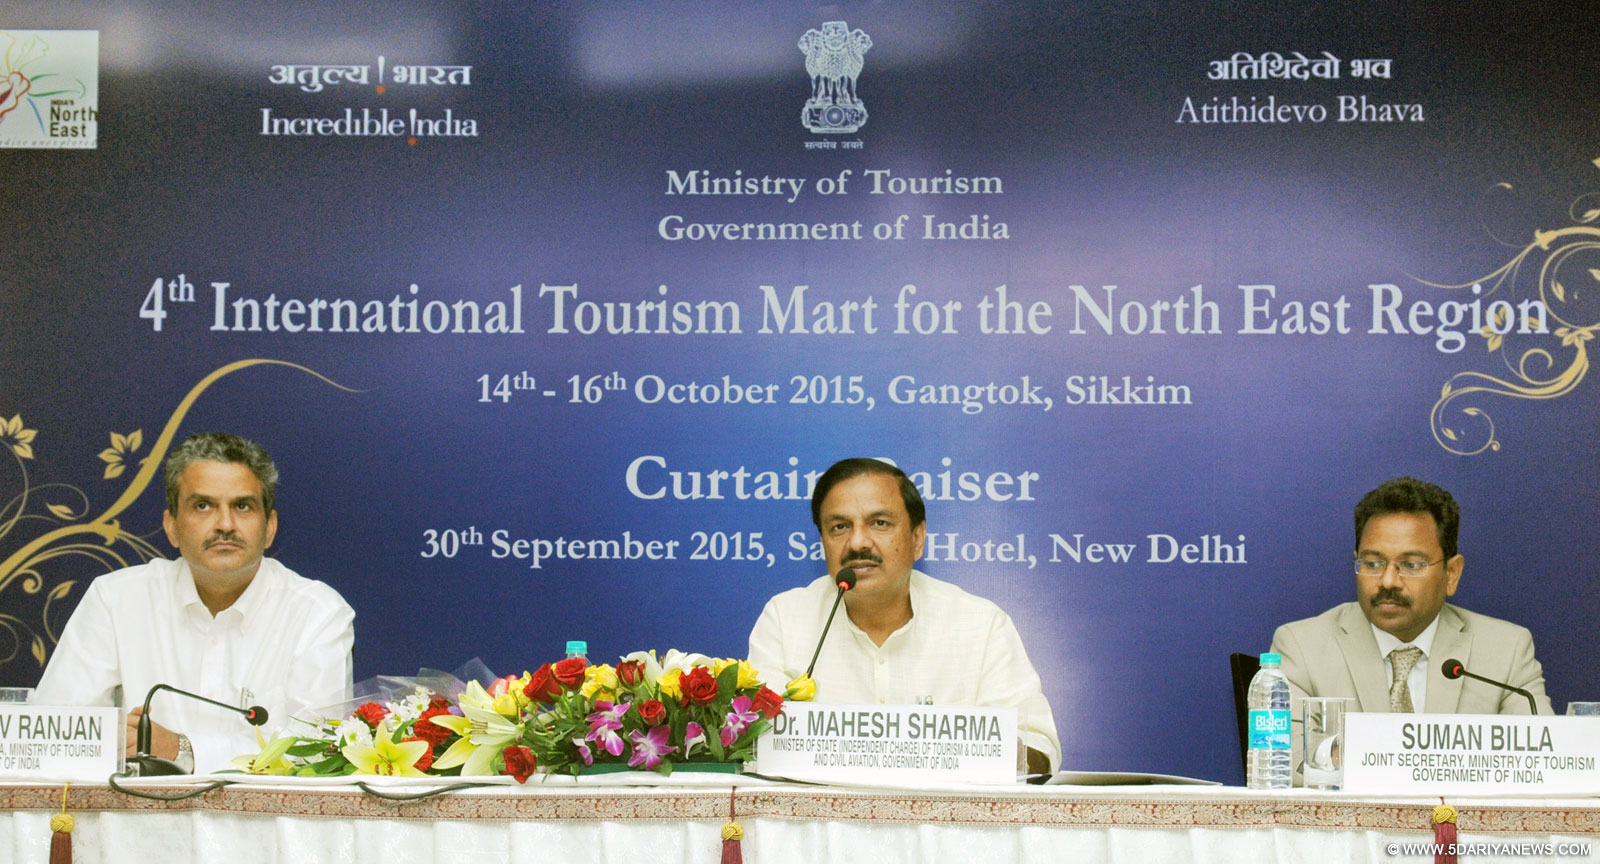 The Minister of State for Culture (Independent Charge), Tourism (Independent Charge) and Civil Aviation, Dr. Mahesh Sharma addressing a Curtain raiser cum pre-event Press Conference for 4th International Tourism Mart (ITM), in New Delhi on September 30, 2015.